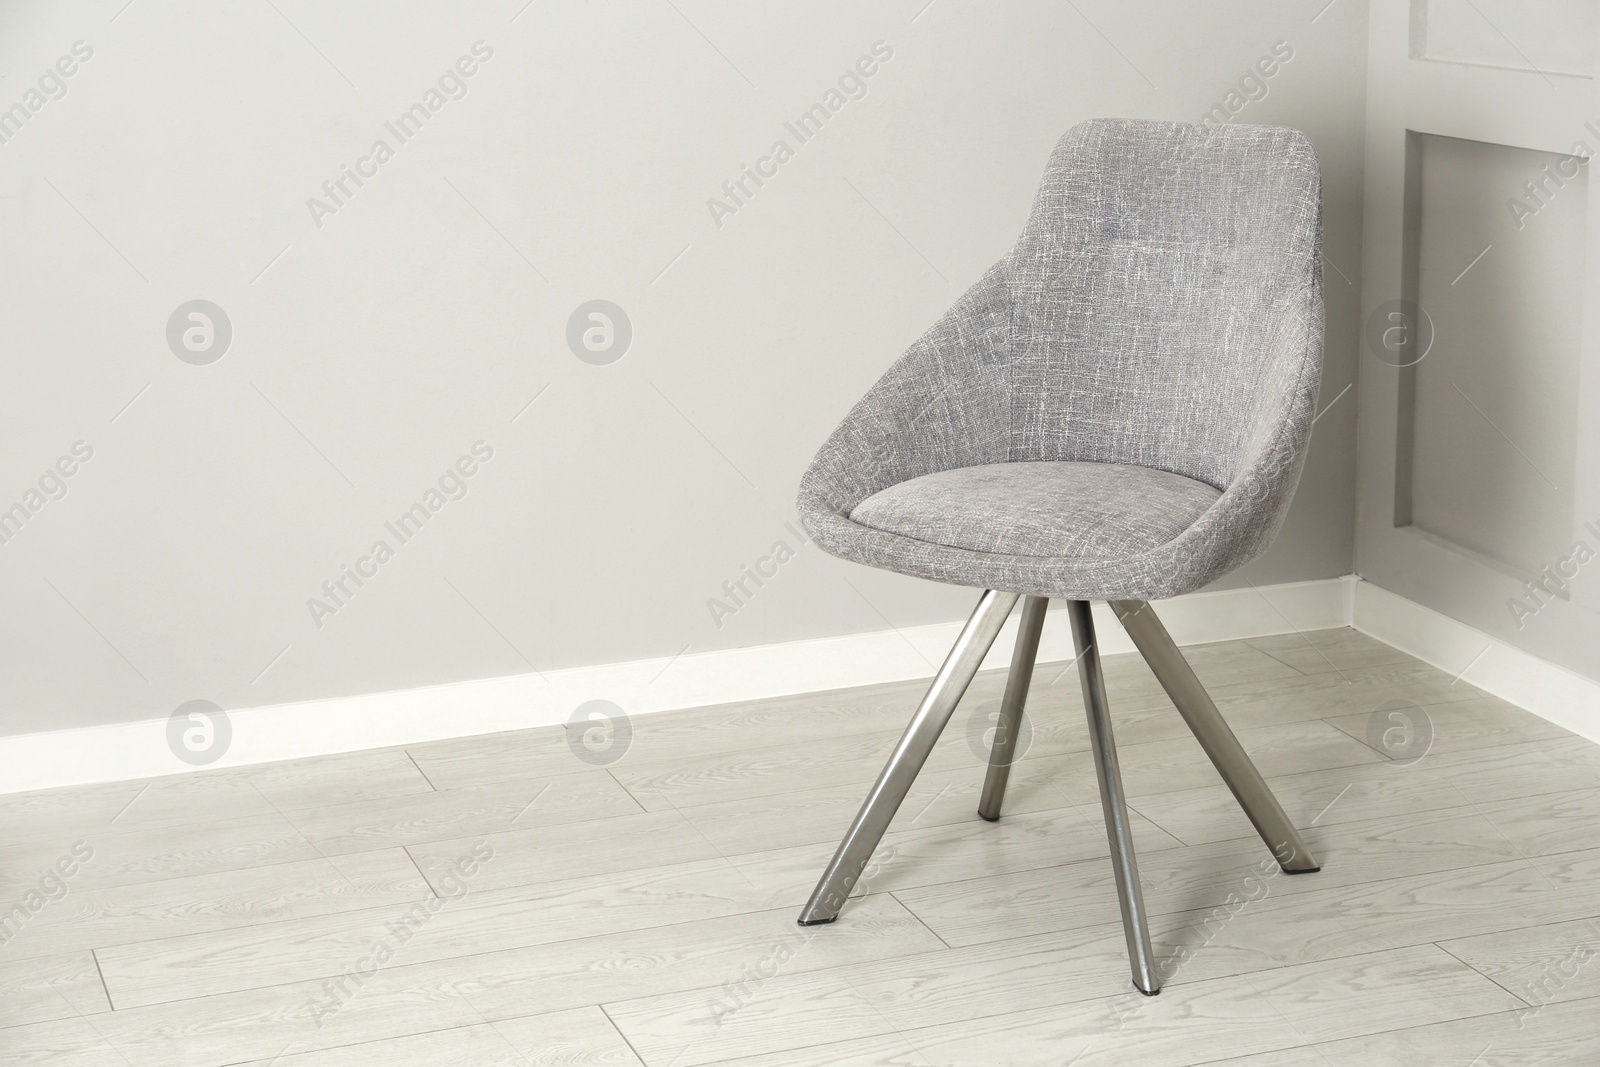 Photo of Stylish chair near light wall in room. Space for text